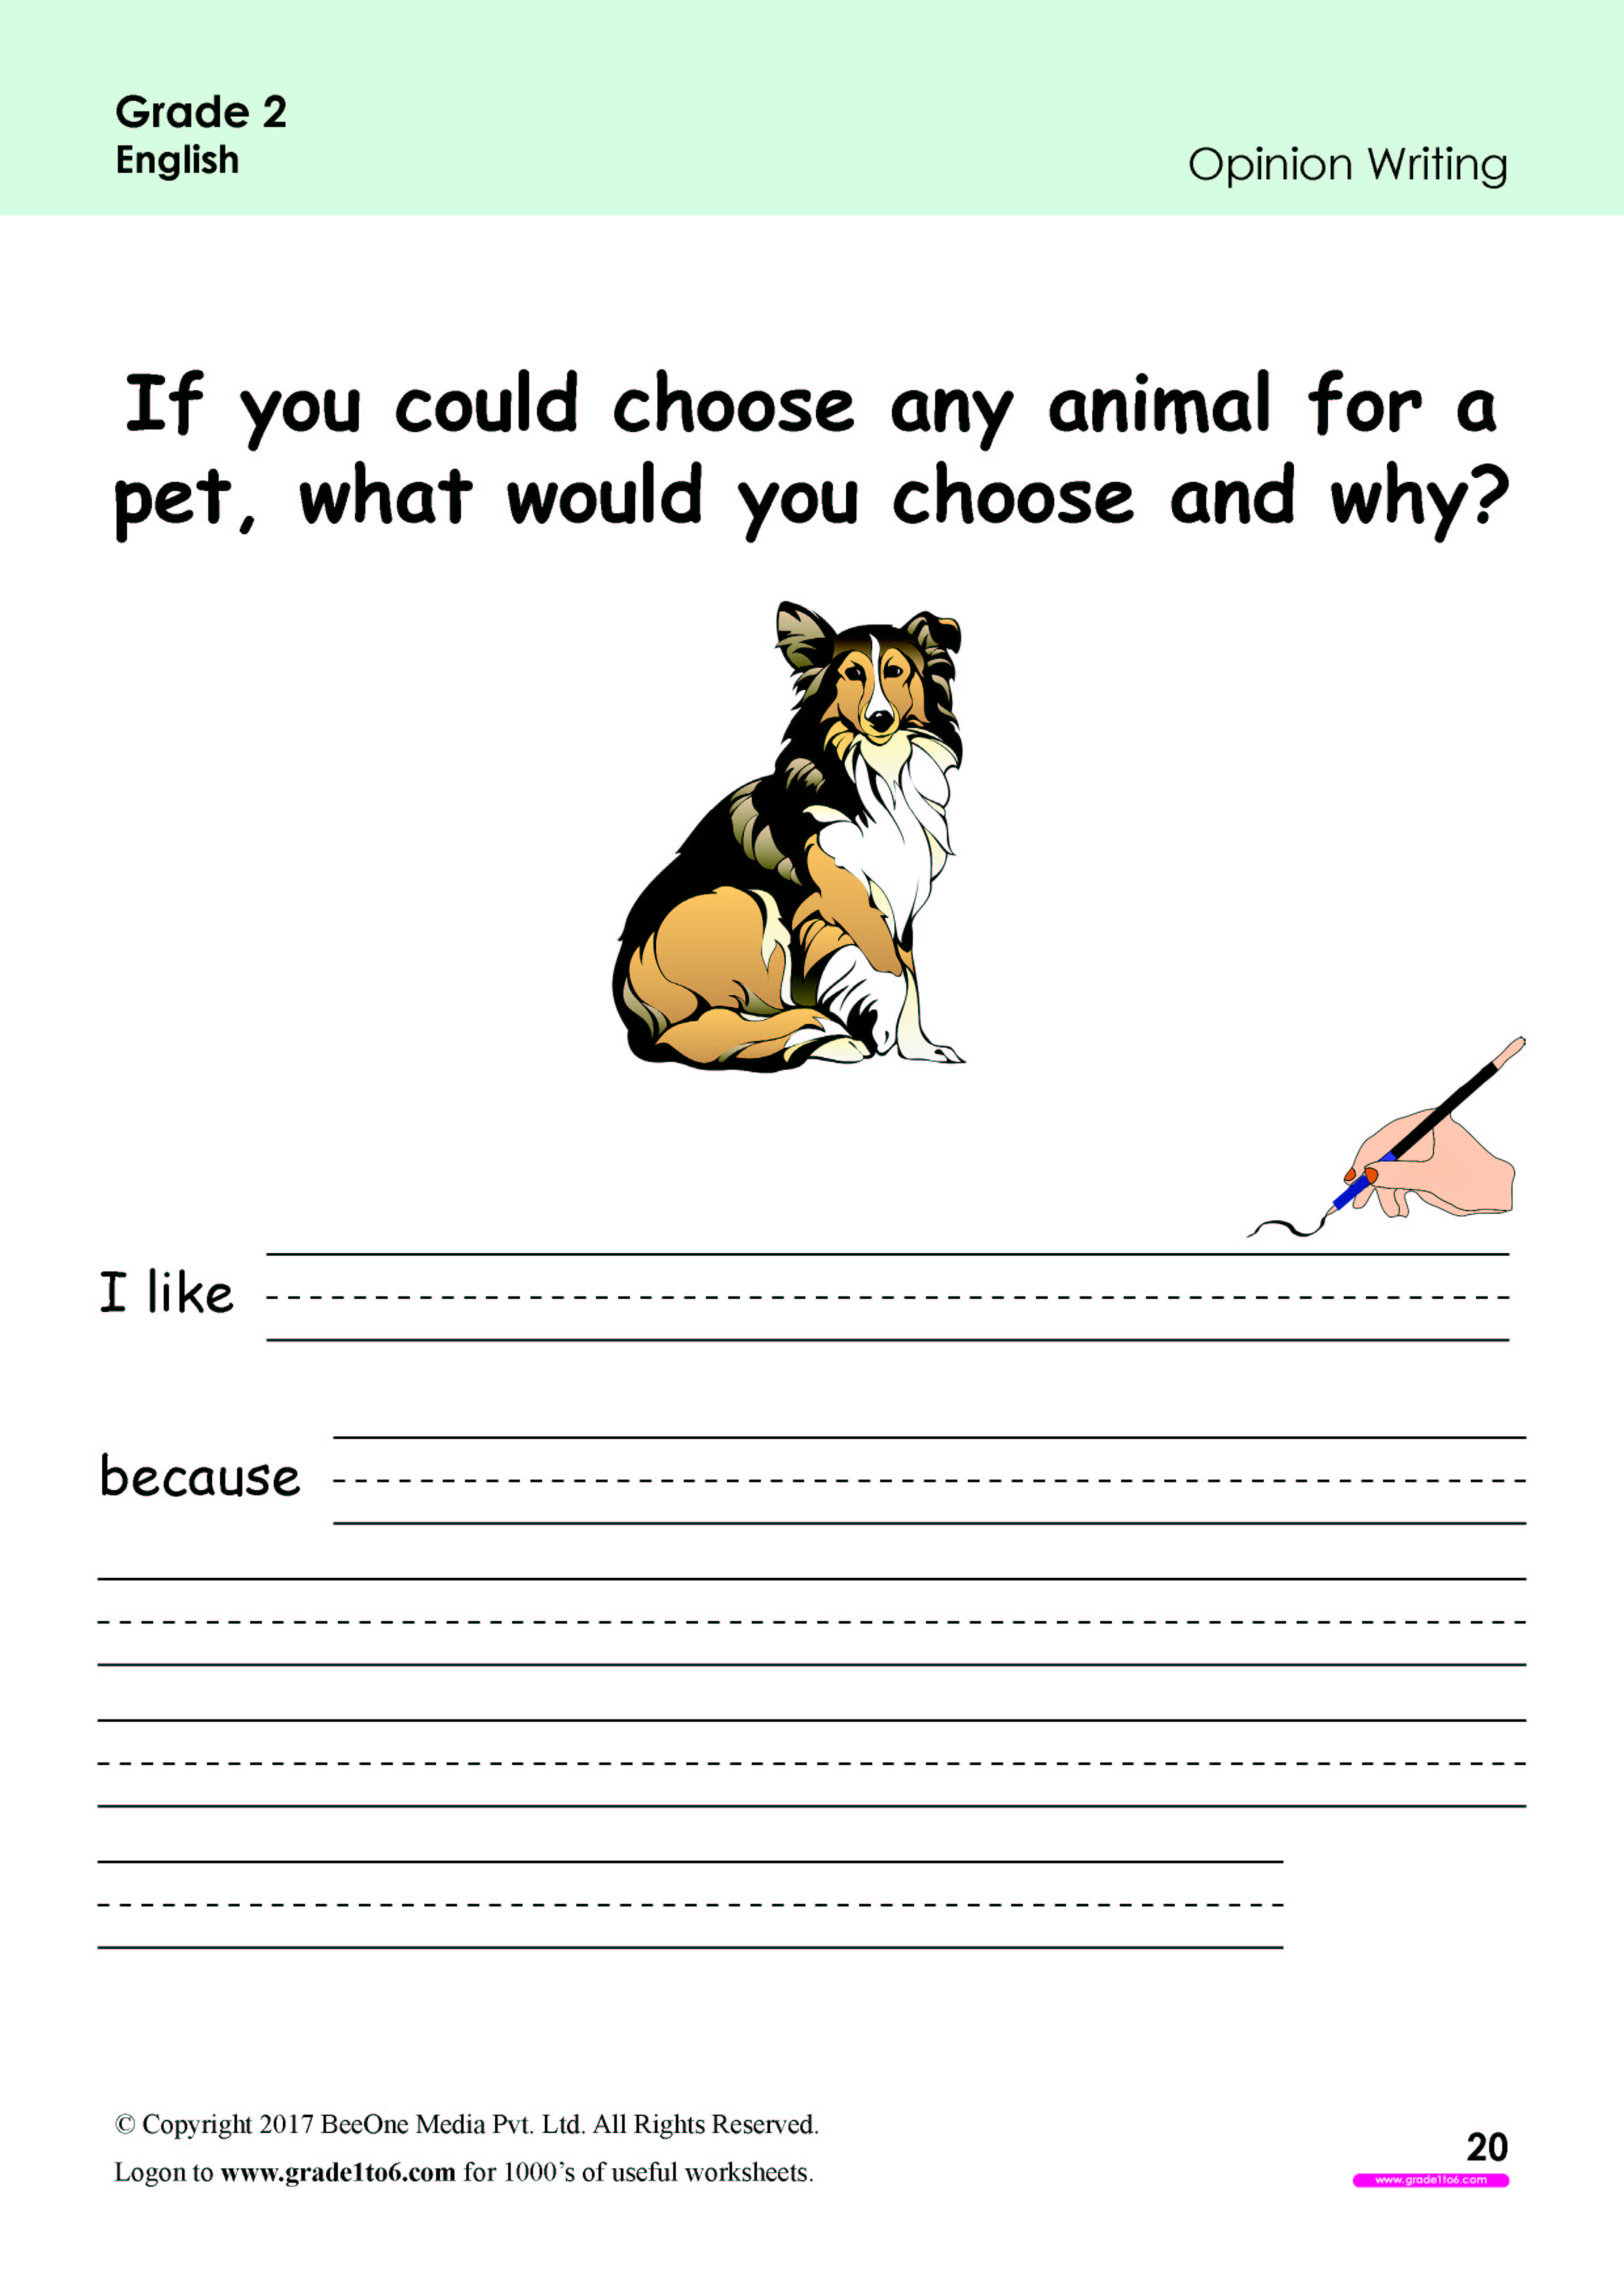 Opinion Writing Worksheets for Grade 2|www.grade1to6.com